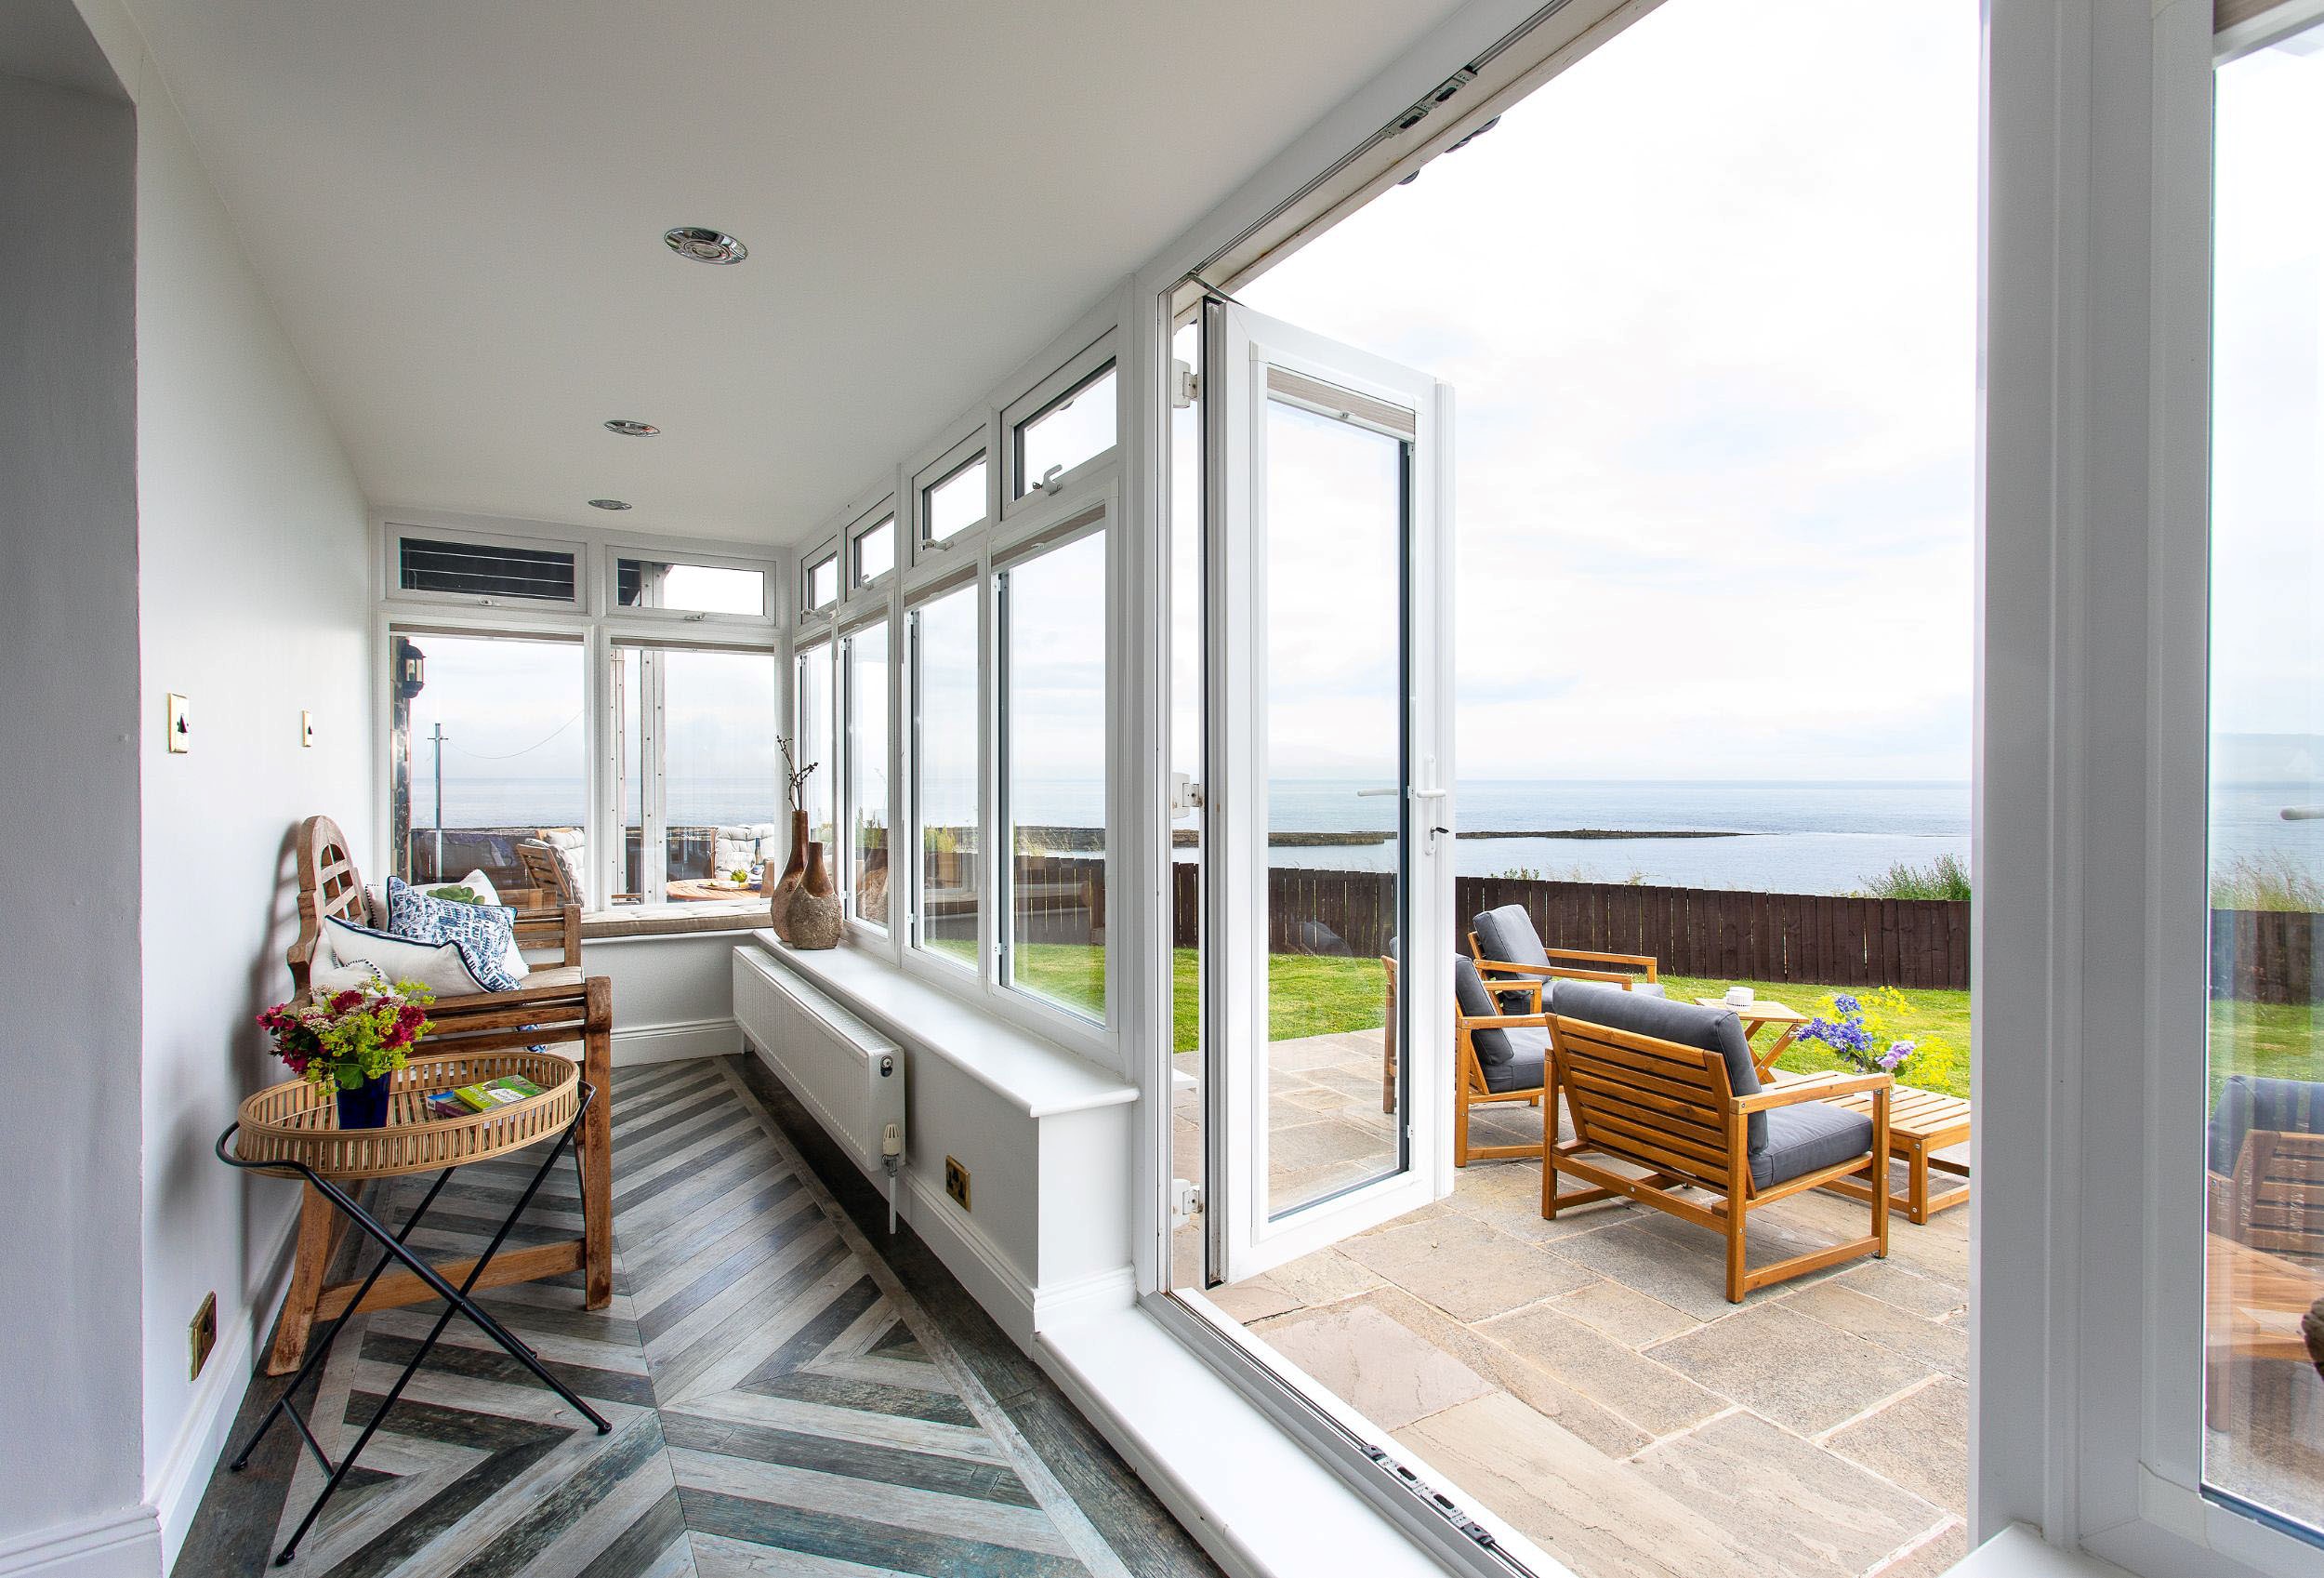 Sea Breeze - French doors from the sun room open out onto the patio